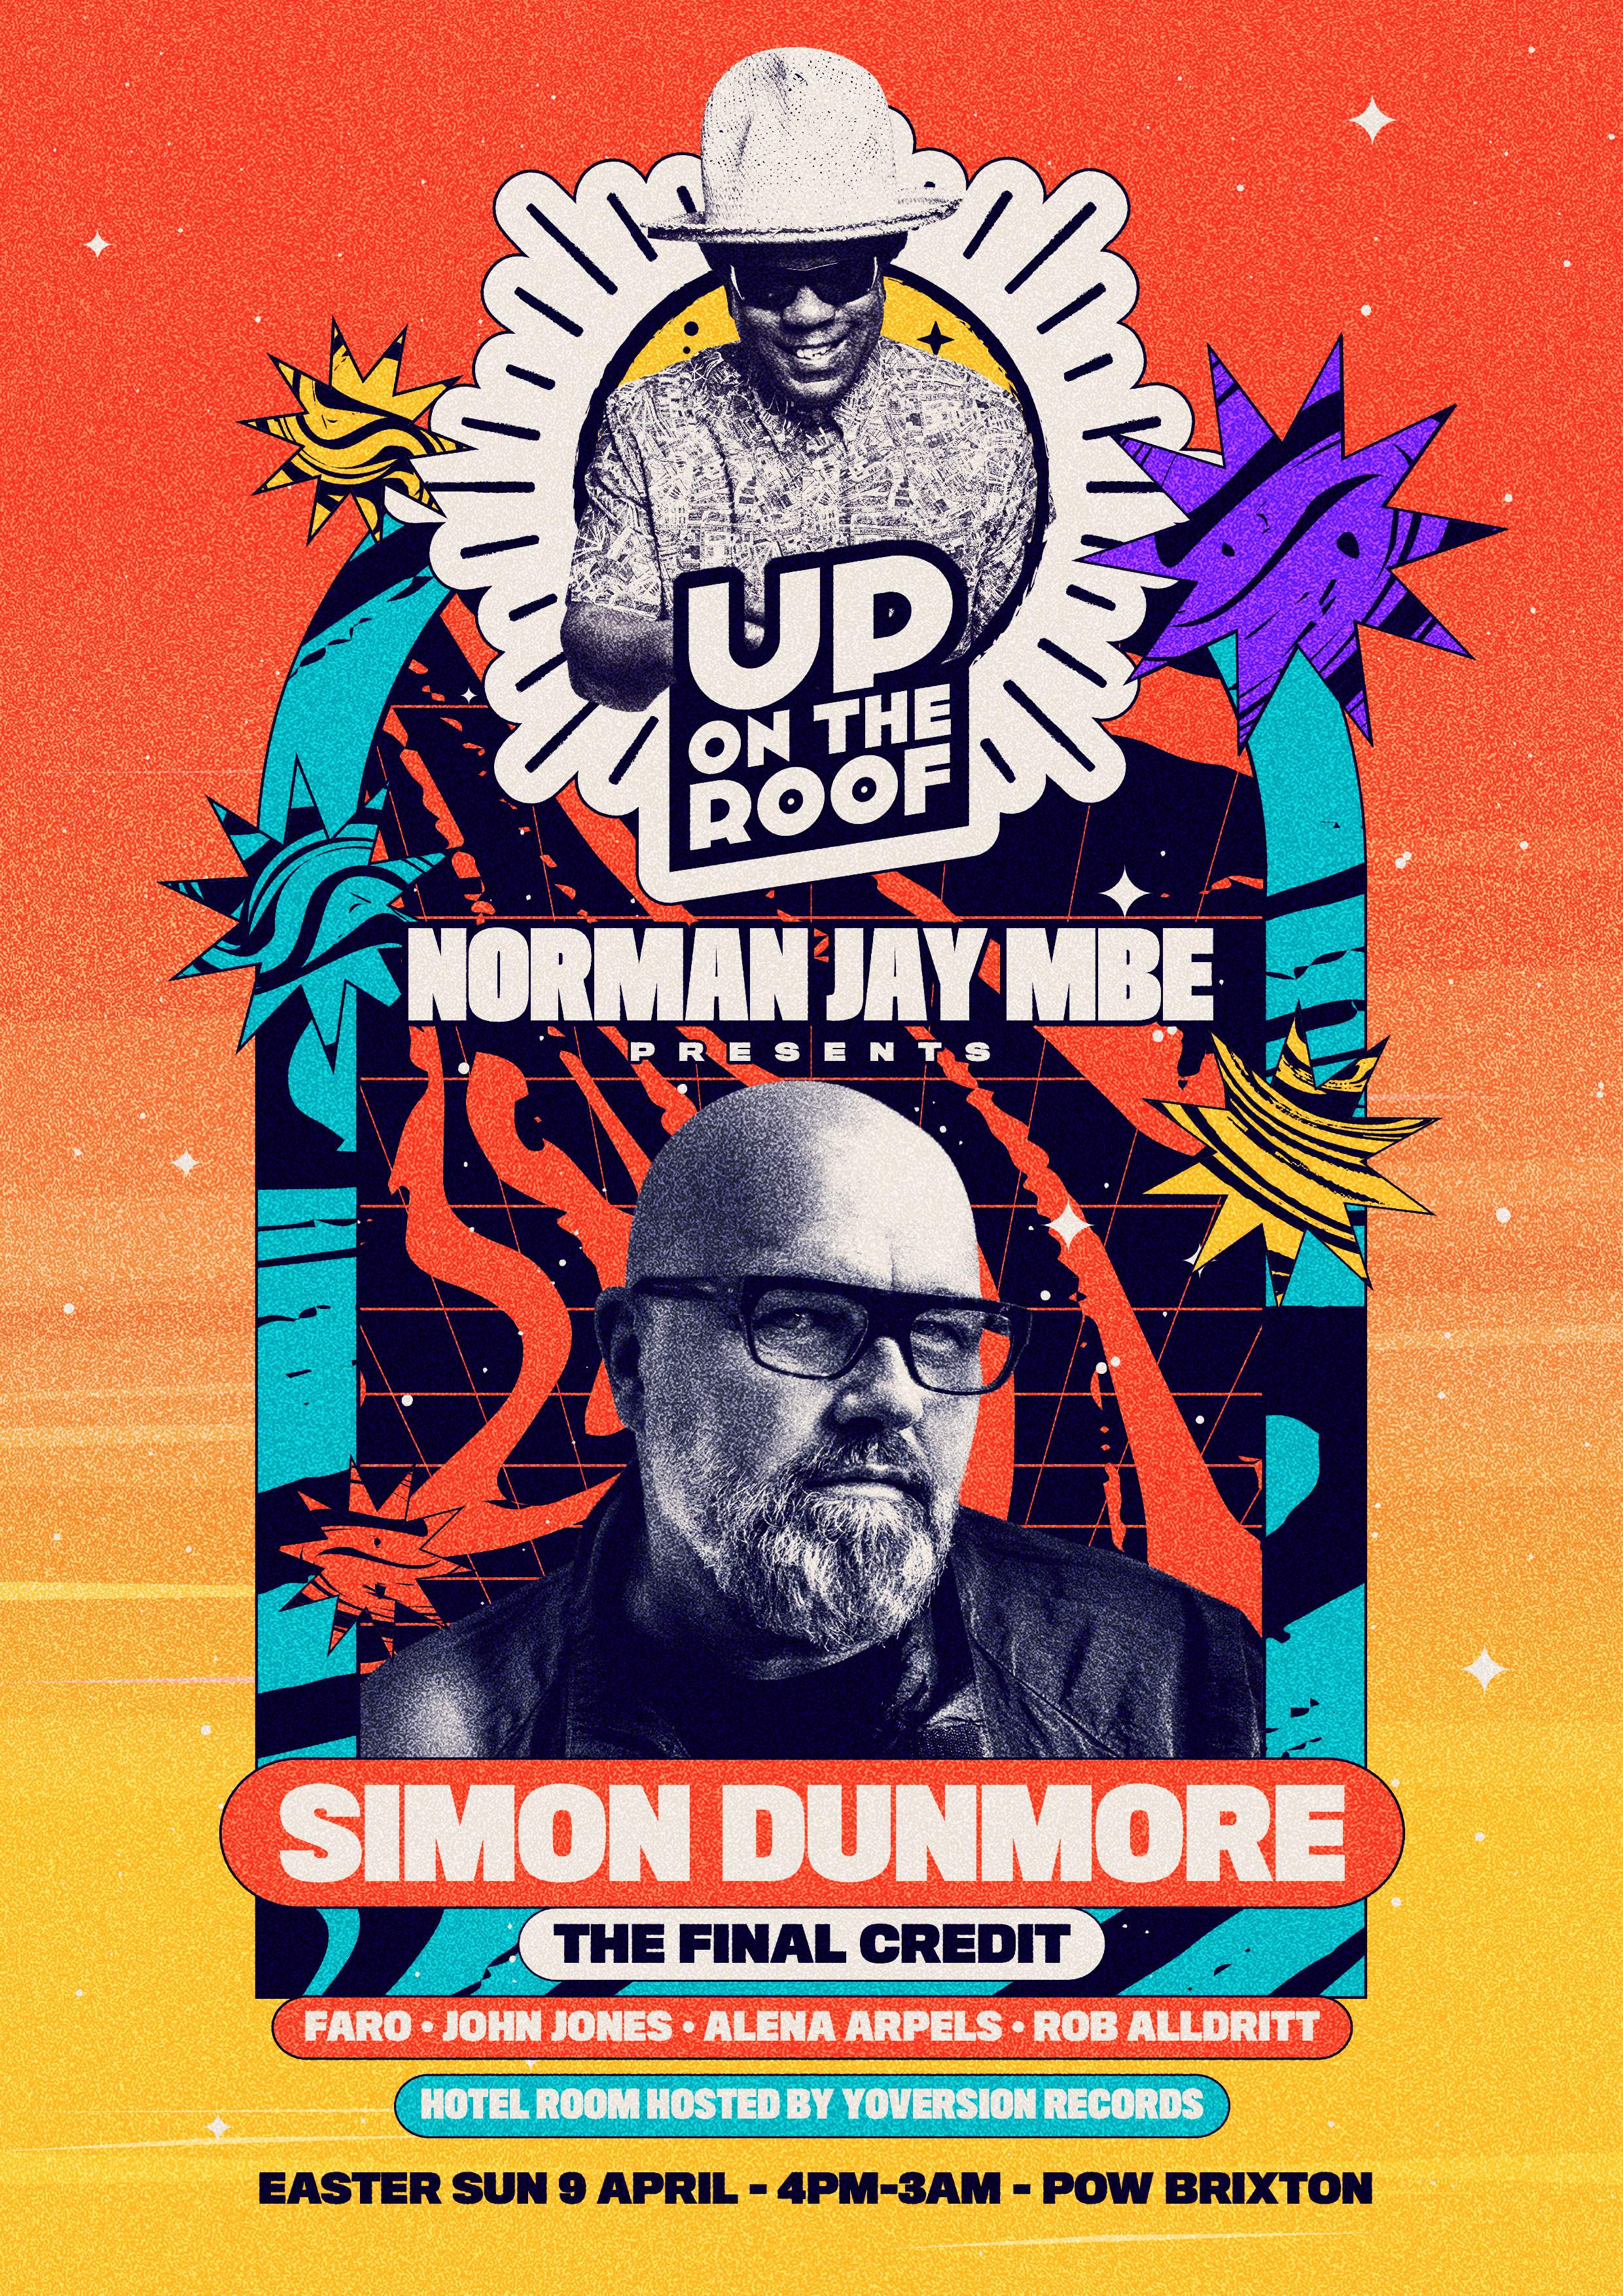 Norman Jay MBE presents Simon Dunmore: The Final Credit...Up On The Roof - Página frontal